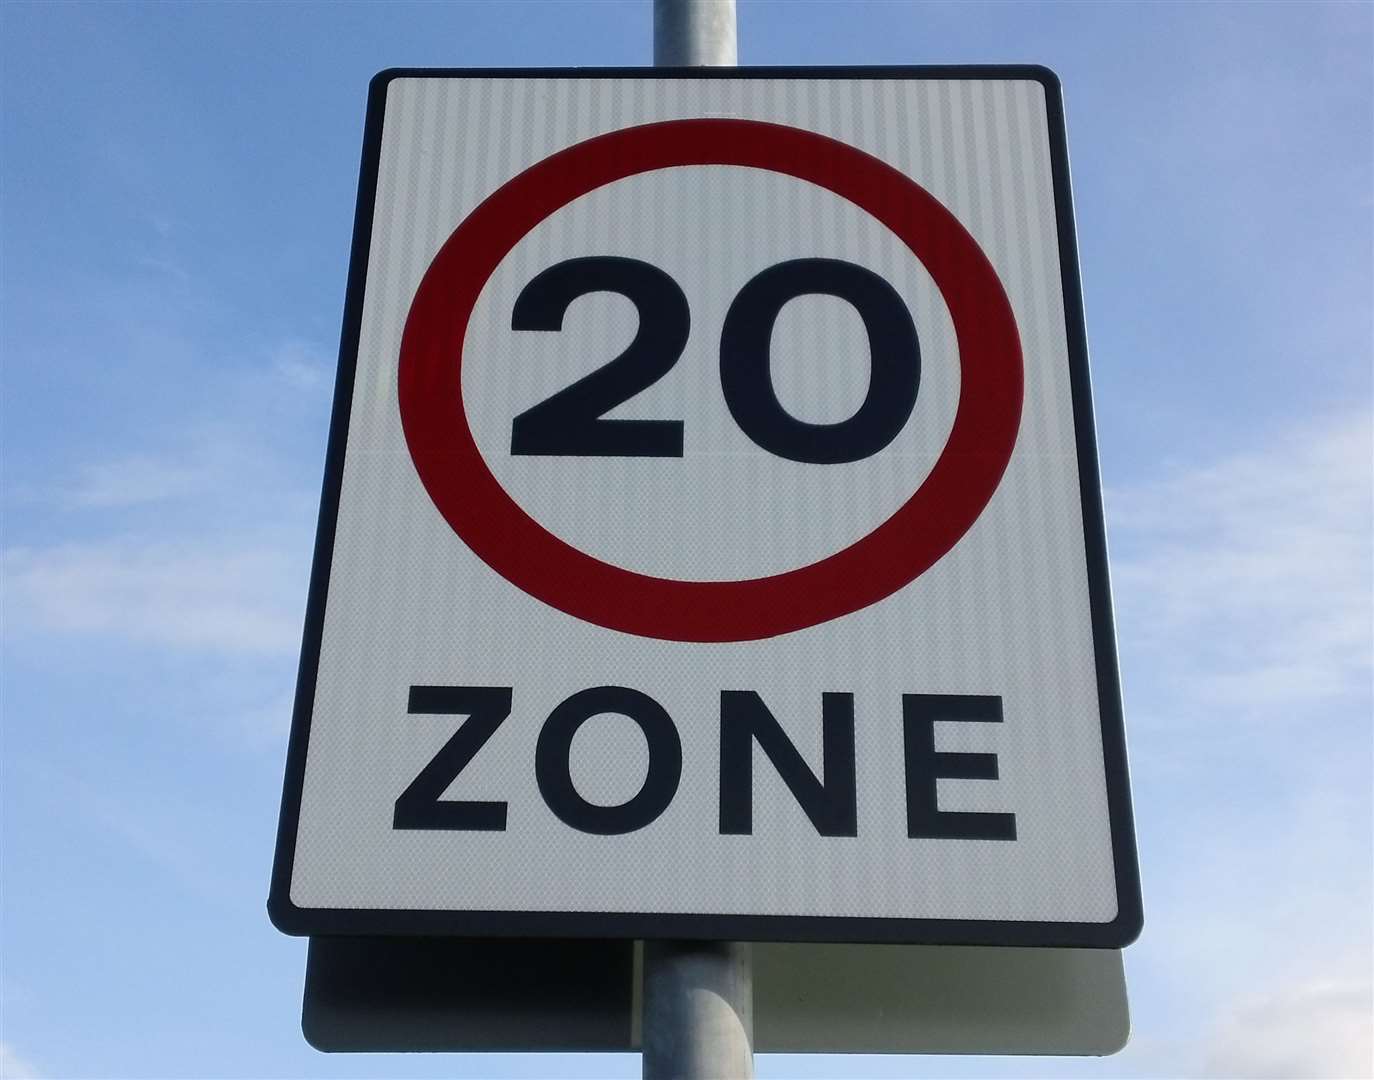 Kent County Council is proposing a town-wide 20mph speed limit in Sevenoaks